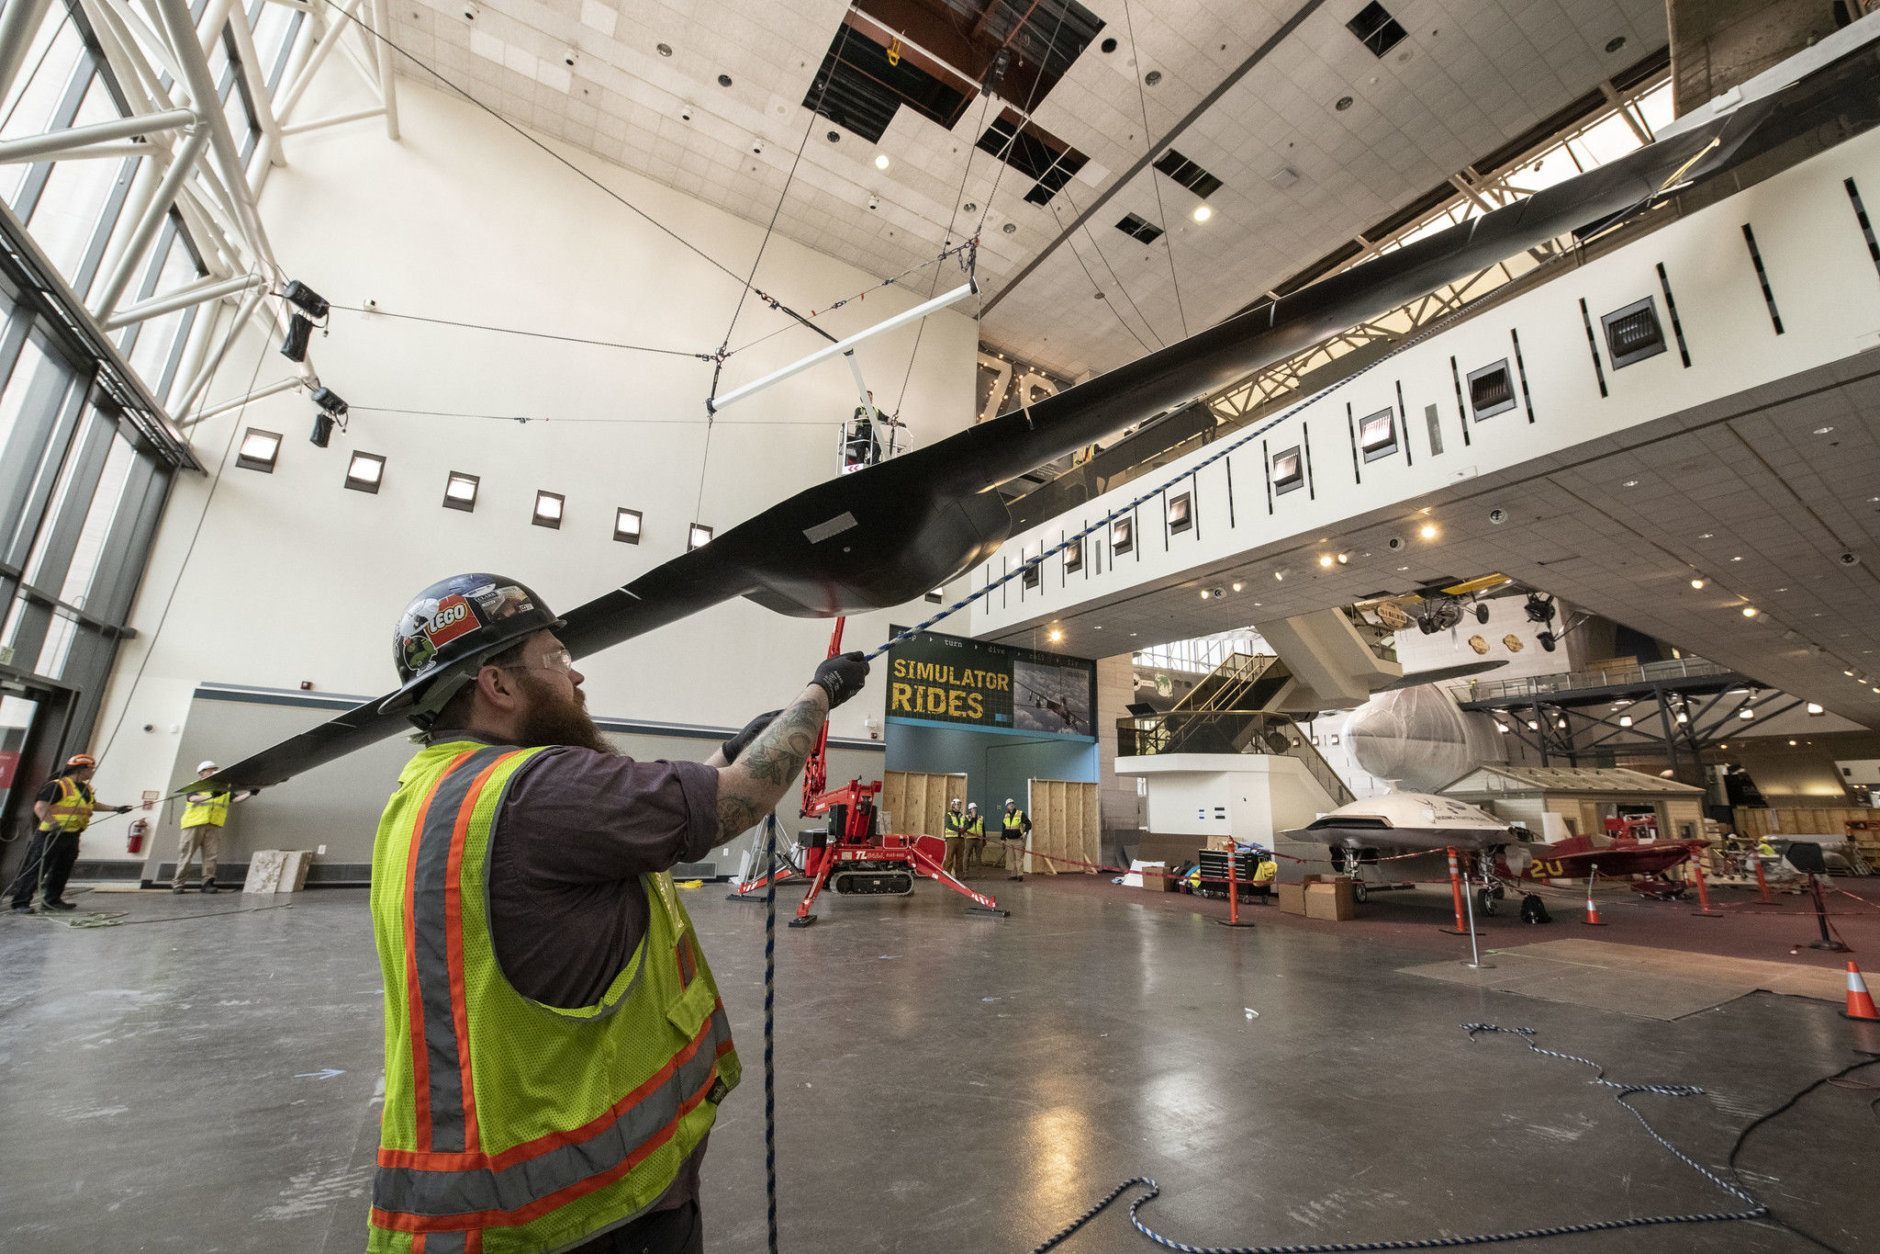 The Lockheed Martin/Boeing RQ-3A DarkStar aircraft is lowered in the Military Unmanned Aerial Vehicles exhibit during west end renovation of the National Air and Space Museum in Washington, DC, March 7, 2019. (Smithsonian photo by Jim Preston)  Material is subject to Smithsonian Terms of Use. Should you wish to use National Air and Space material in any medium, please submit an Application for Permission to Reproduce NASM Material, available at:  https://airandspace.si.edu/permissions